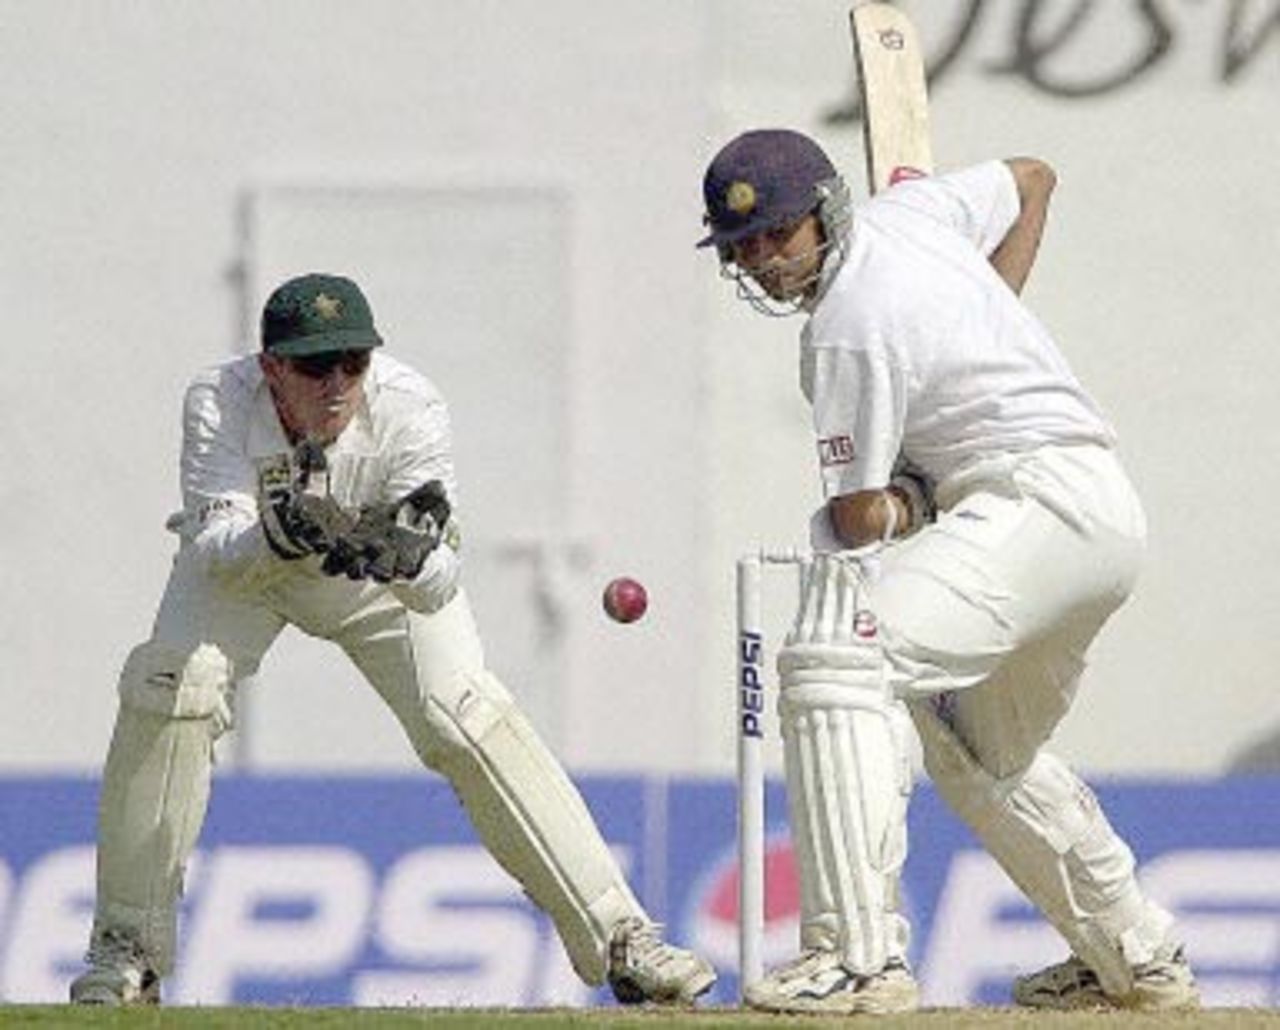 Indian batsman Rahul Dravid (R) about to whip a delivery from Zimbabwean bowler Henry Olonga (not in picture) as wicketkeeper Andy Flower (L) looks on during the first day of the second test match between India and Zimbabwe in Nagpur 25 November 2000. India made 91 for 1 by lunch.